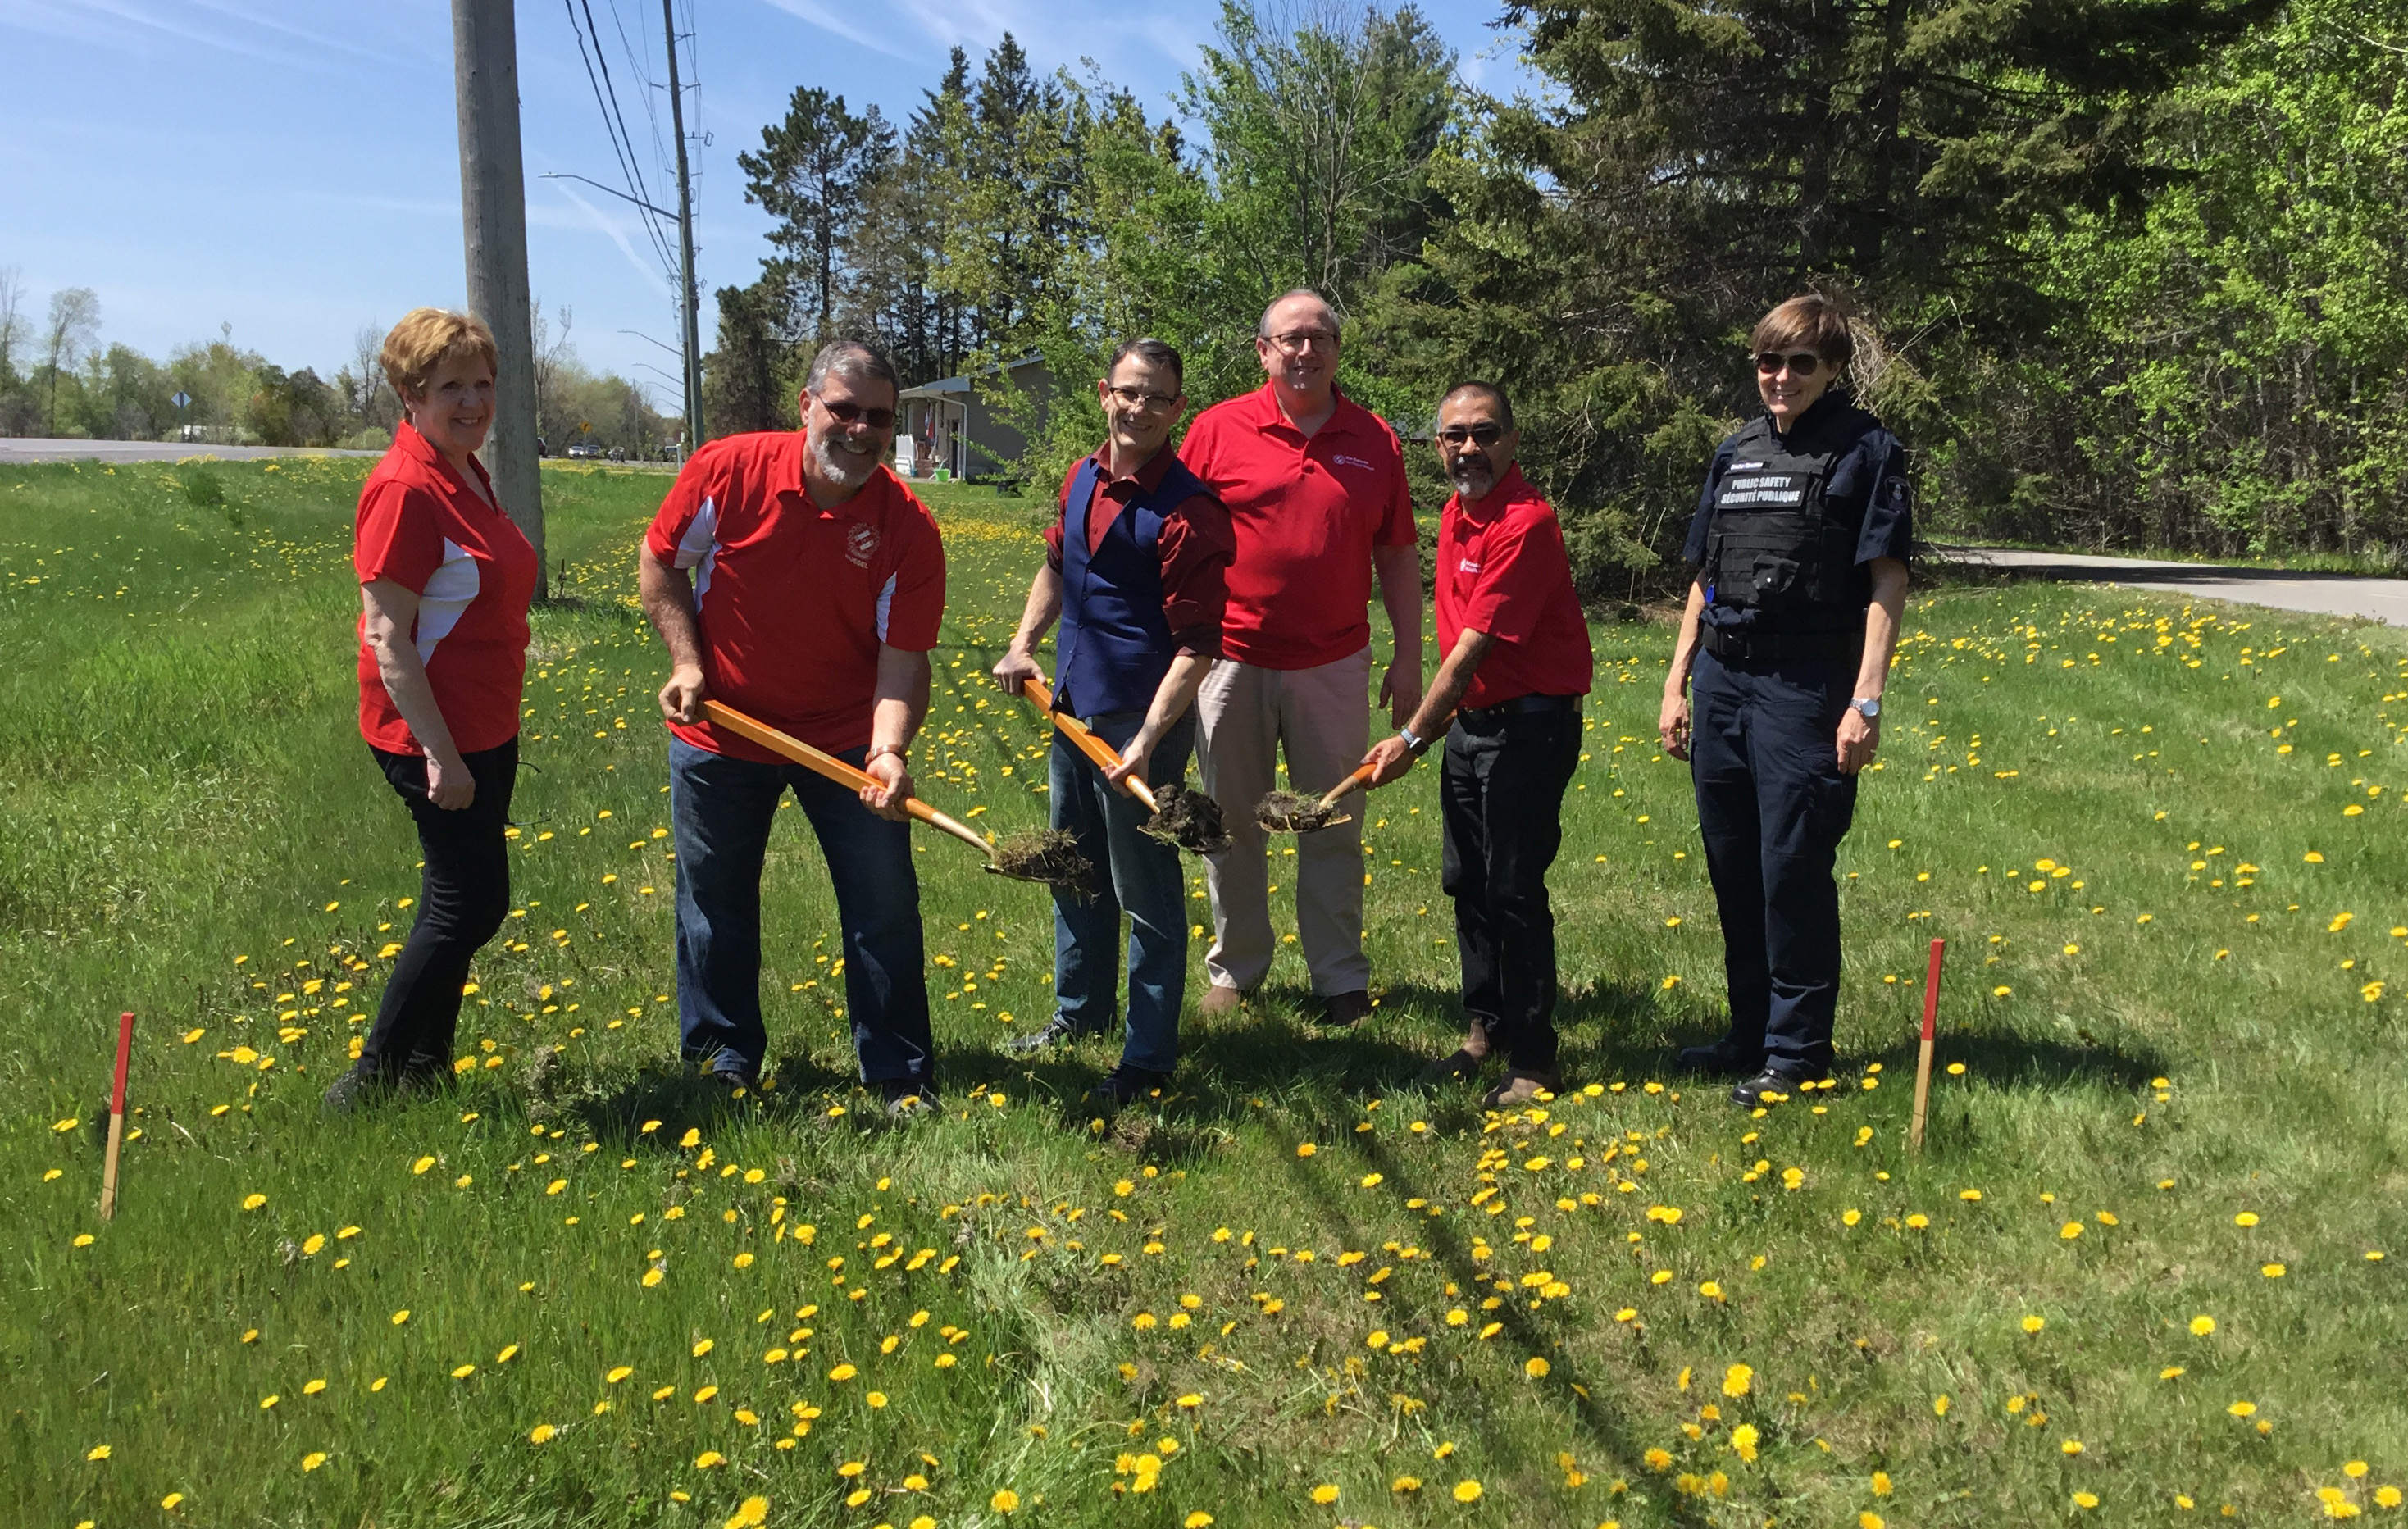 Committee members with shovels